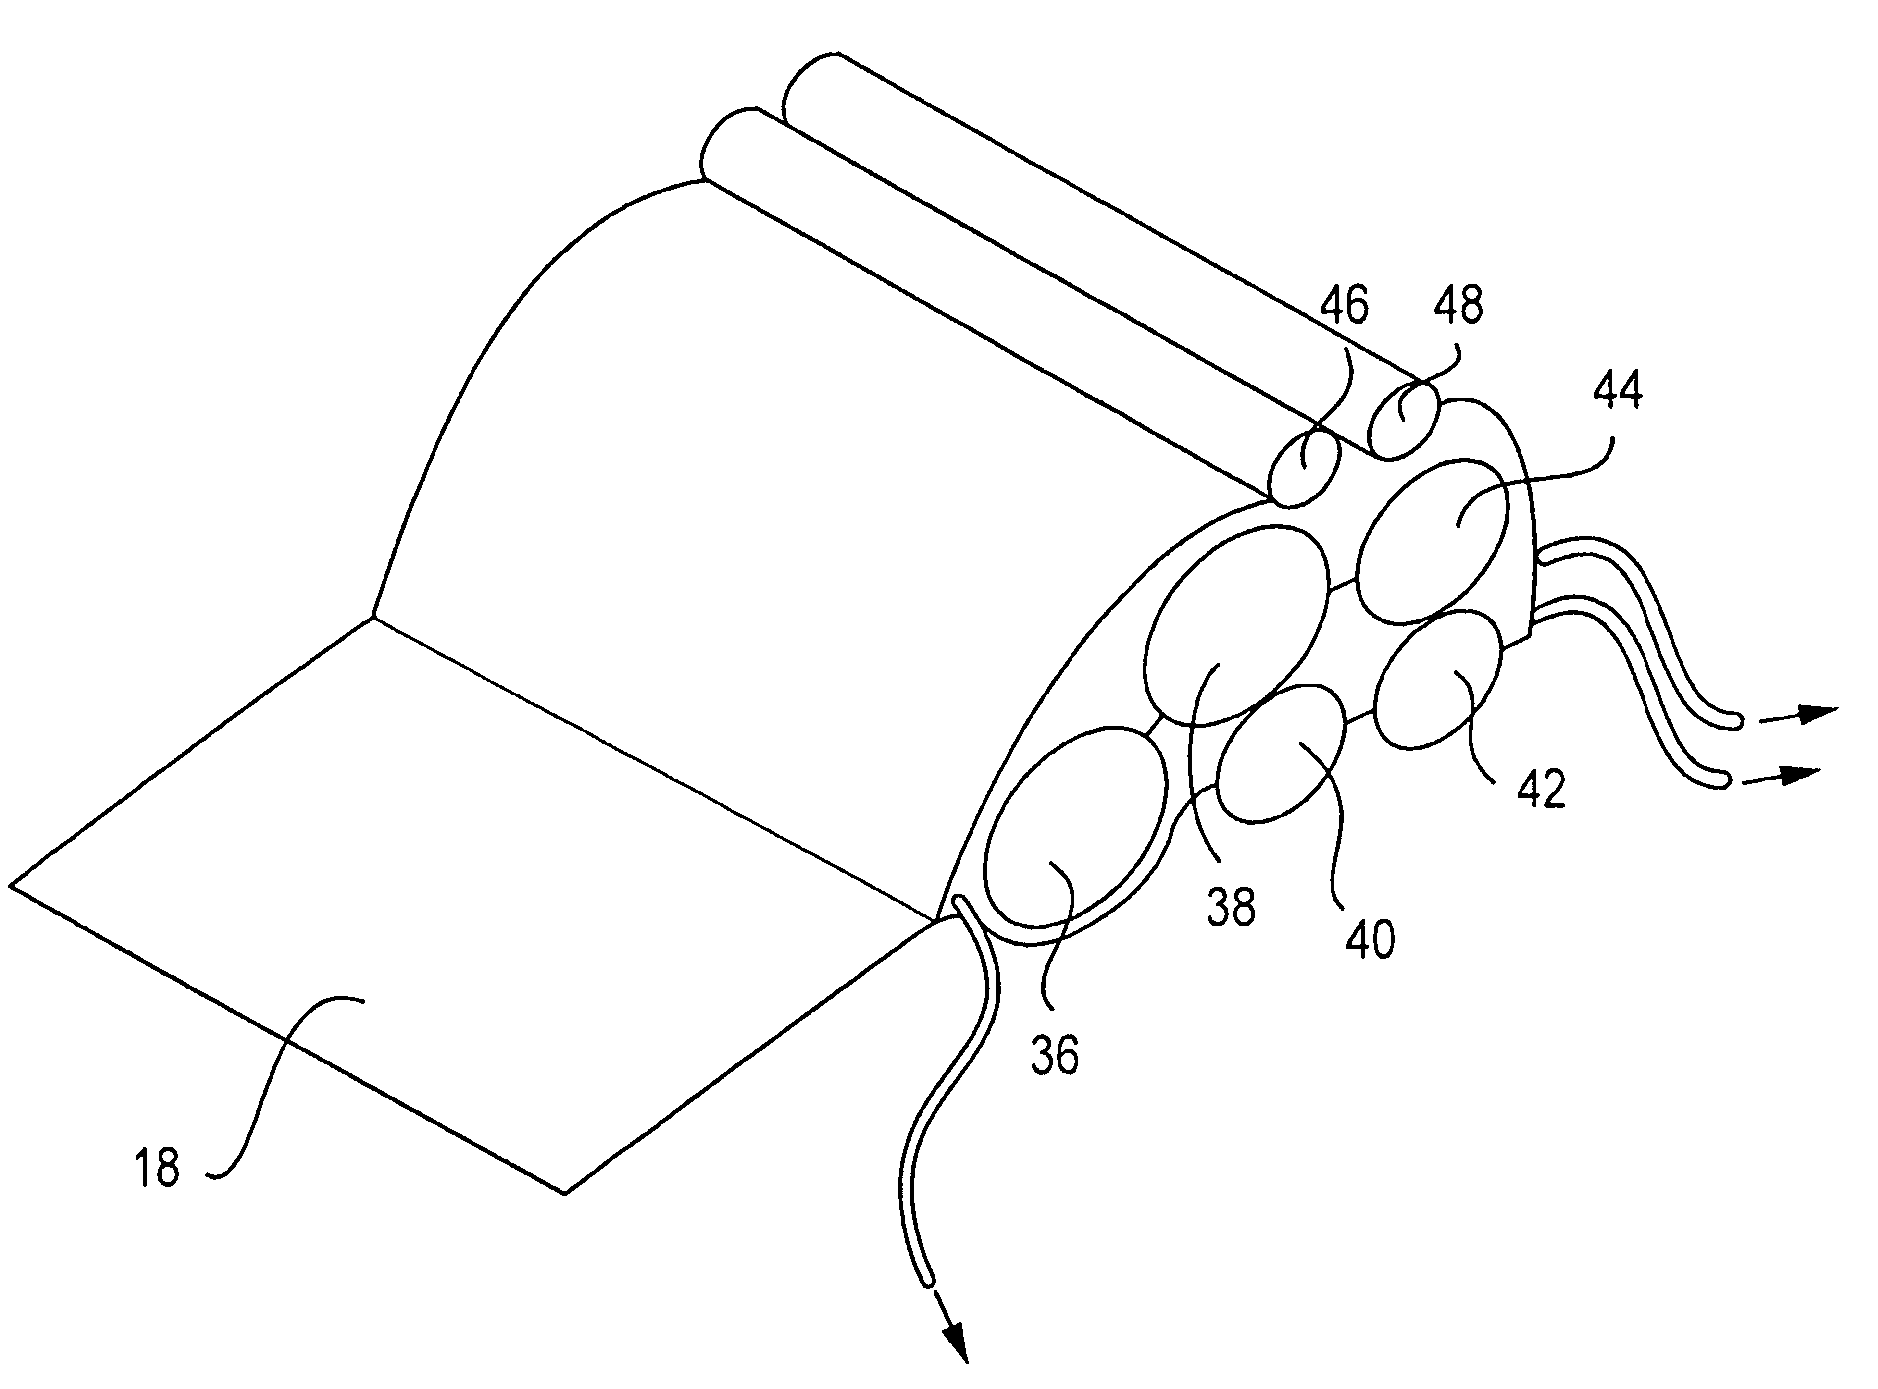 Apparatus and method to position a patient for airway management and endotracheal intubation